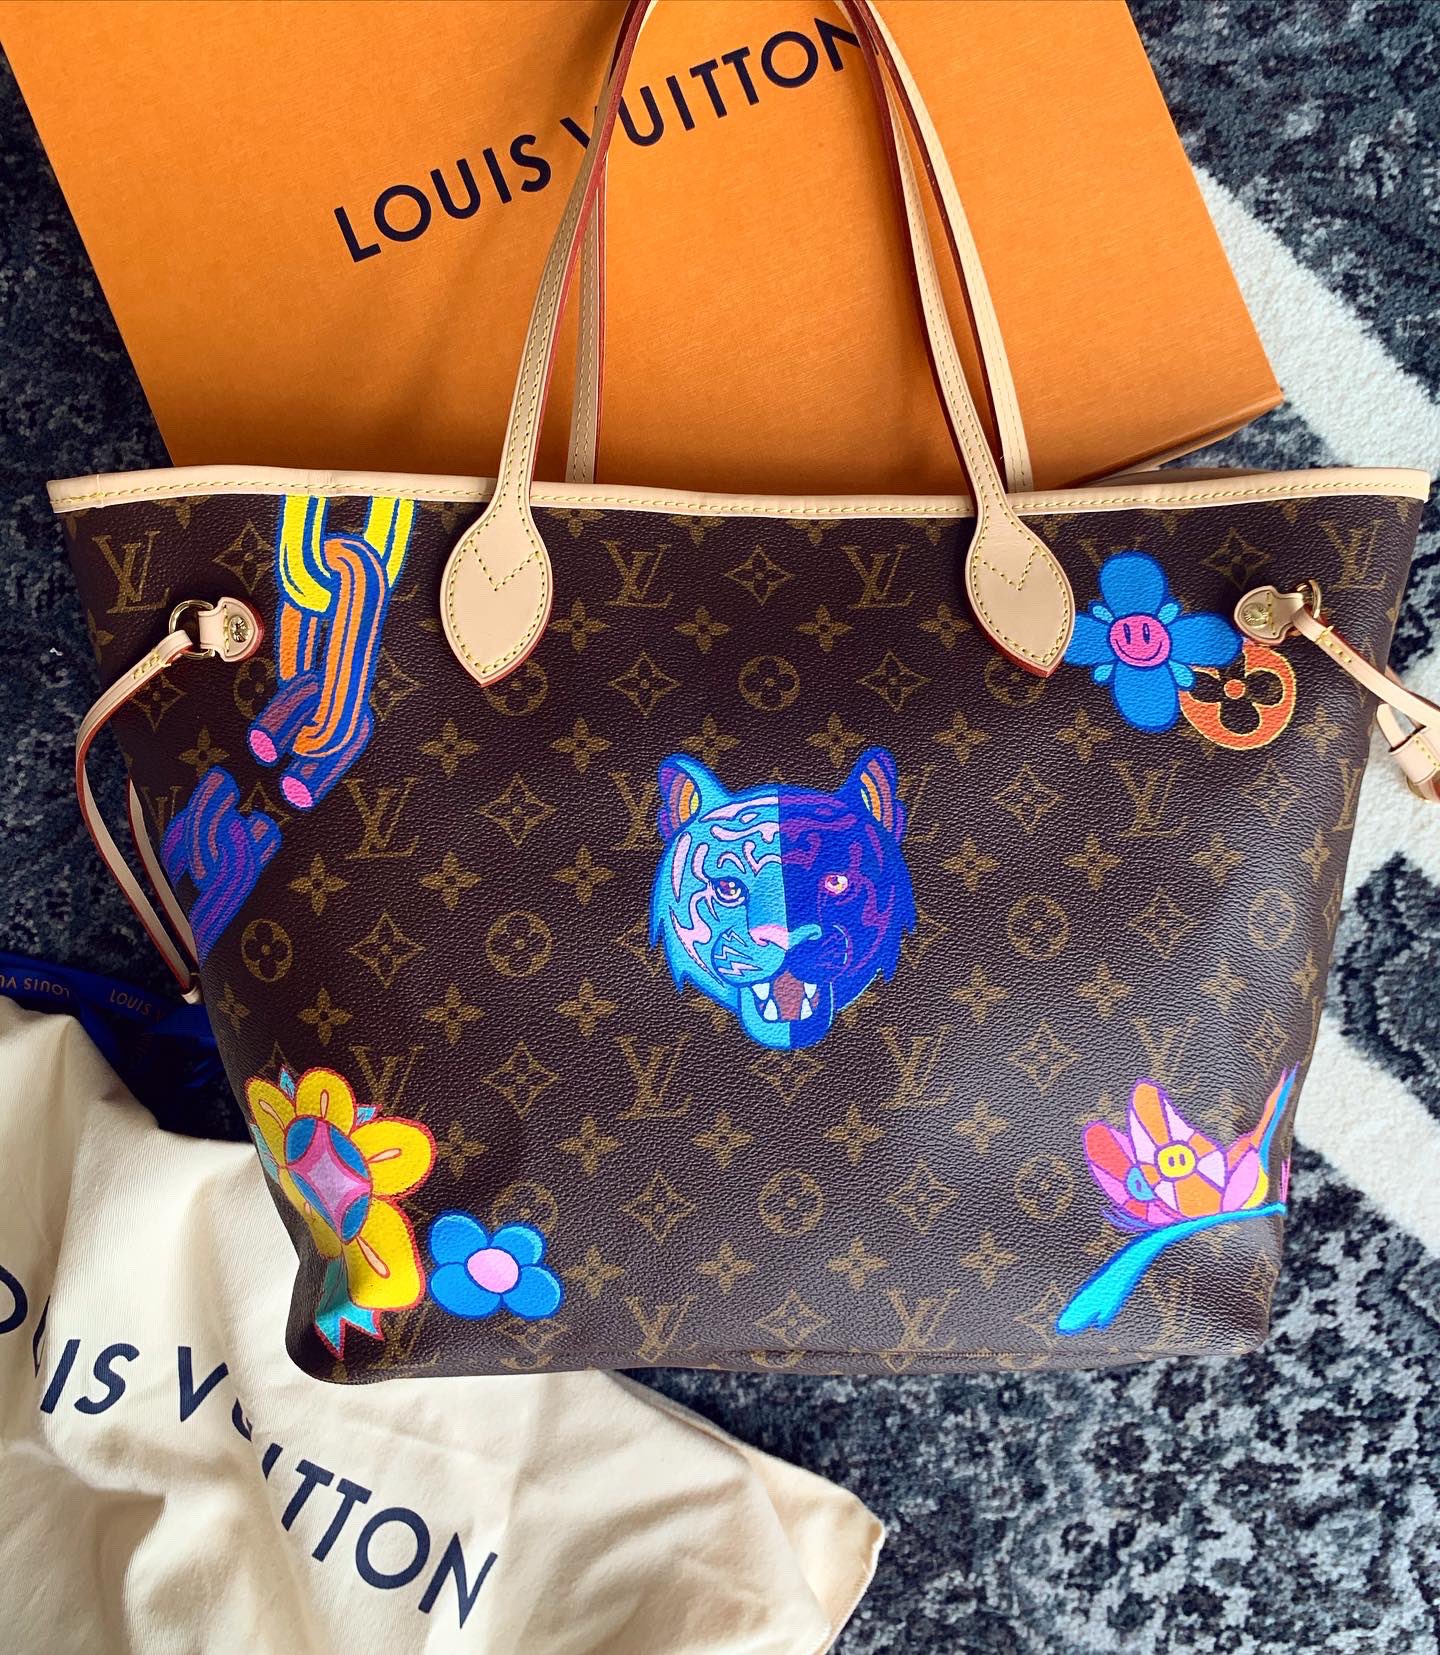 vexx.eth on X: Surprised my mom with a hand-painted LV bag